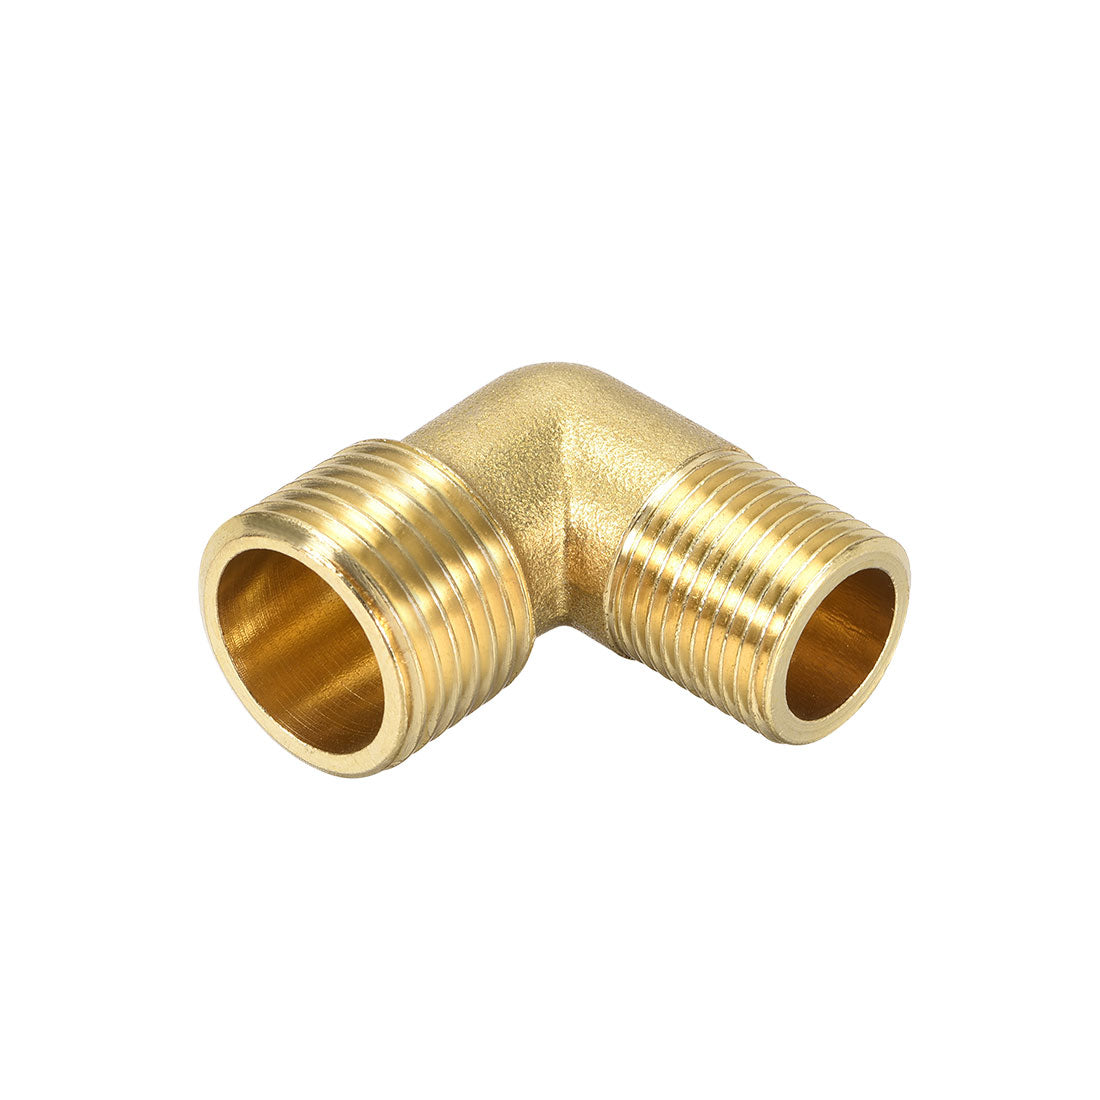 uxcell Uxcell Brass Pipe Fitting 90 Degree Elbow G3/8 Male x G1/2 Male